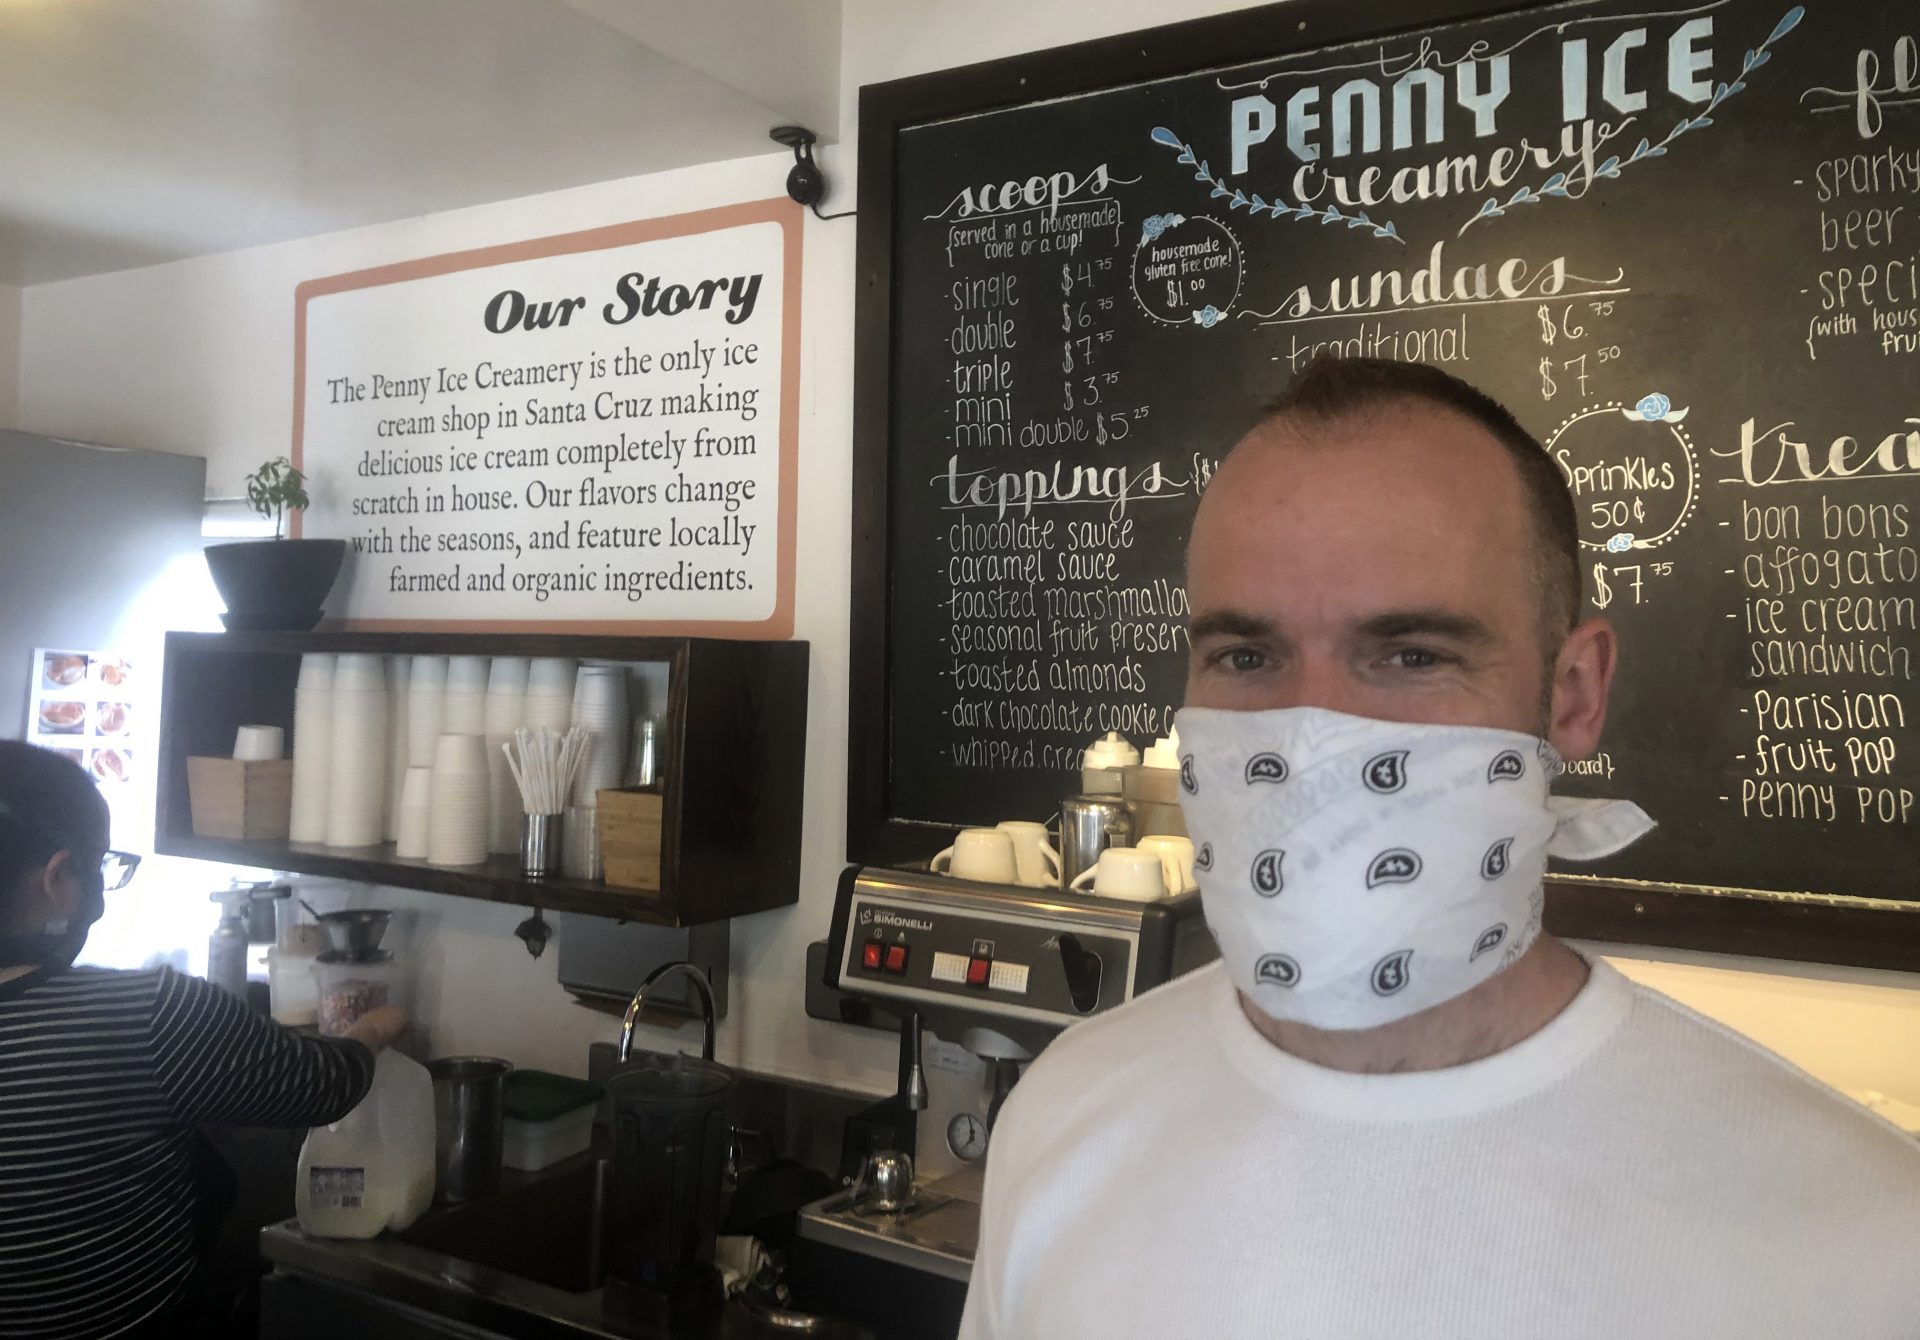 In this April 17, 2020, photo, Zachary Davis poses for a photo at The Penny Ice Creamery in Santa Cruz, Calif. An investigation by The Associated Press hows that many large companies which collectively received tens of millions of dollars in federal loans through the Paycheck Protection Program were at risk of failing even before the coronavirus walloped the economy, while others have acknowledged problems keeping their finances straight and a few have been under investigation by the Securities and Exchange Commission. That big companies and ones with questionable records received such precious financial aid during the chaotic last few weeks frustrates Davis, “We were feeling pretty good about where we were in the world. Now it’s just all turned upside down,” said Davis, who had to lay off 70 workers.